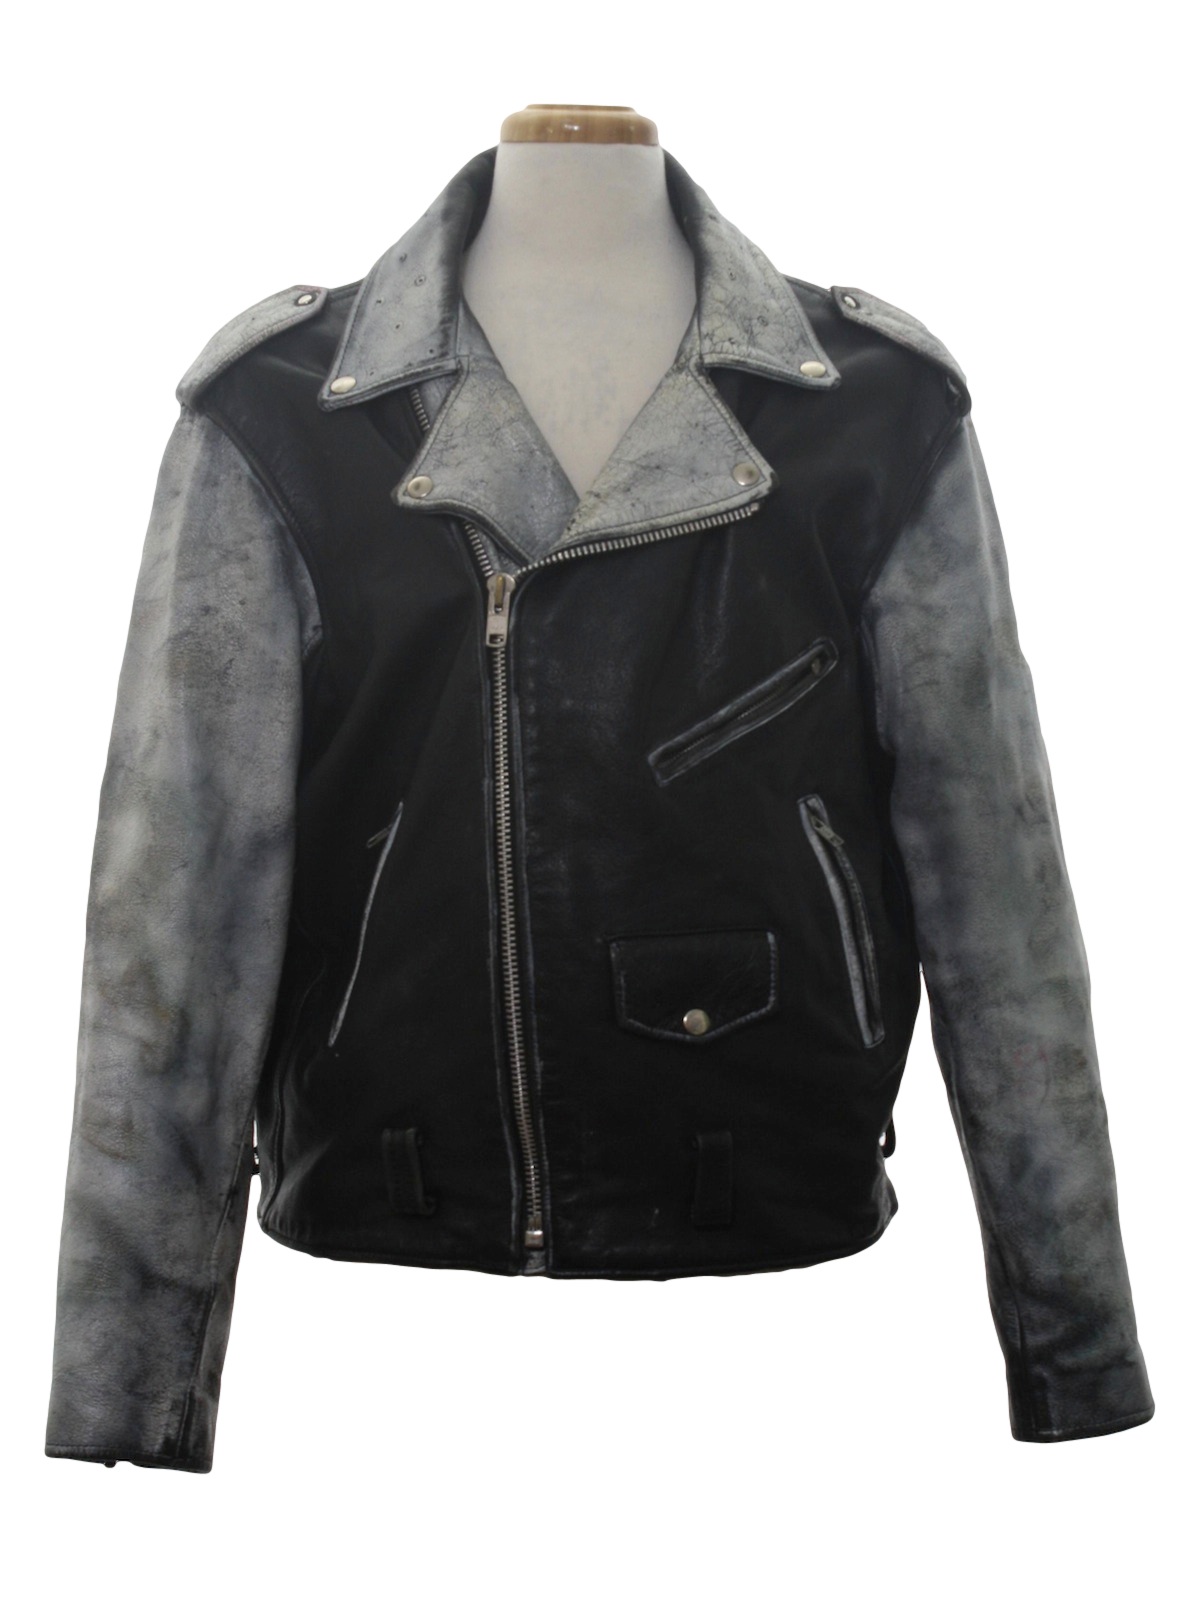 Retro 1980's Leather Jacket (Size Label Only) : 80s -Size Label Only ...